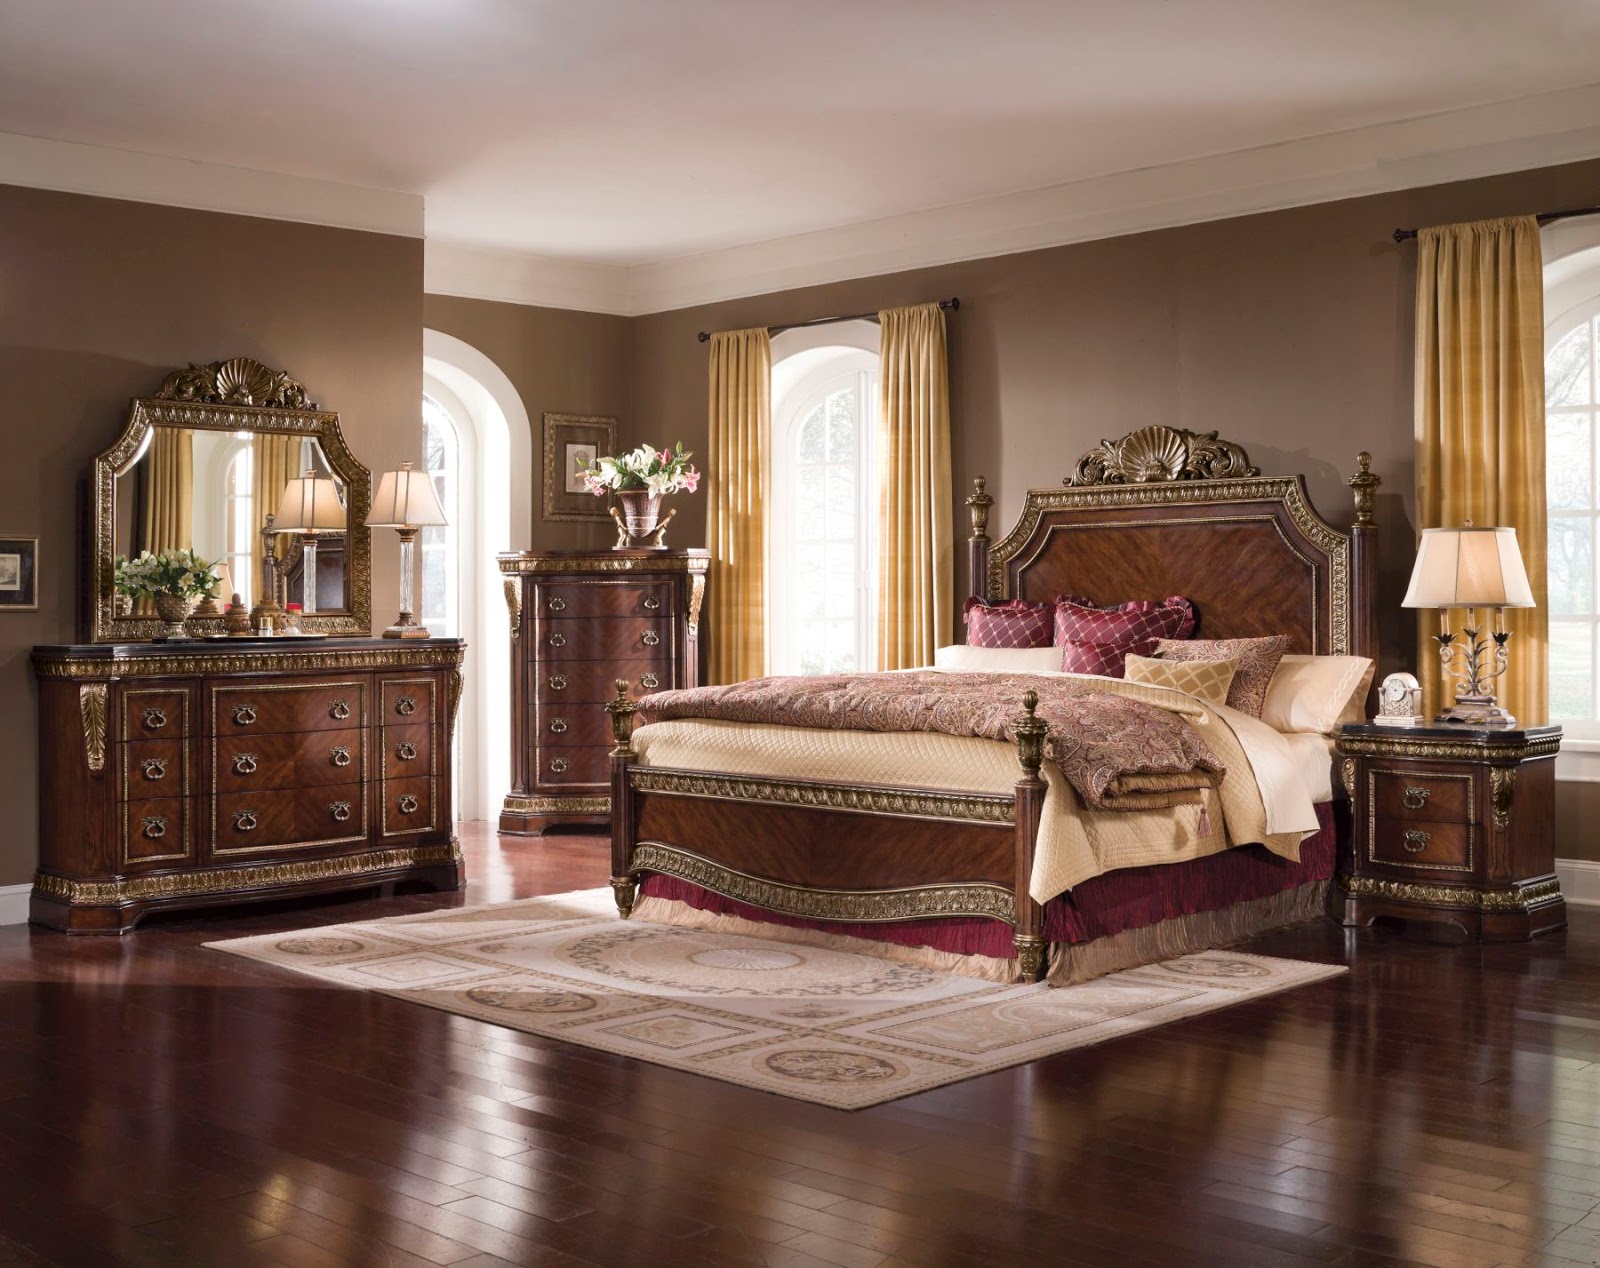 Modern Victorian Bedroom Ideas: Timeless Elegance For Your Home